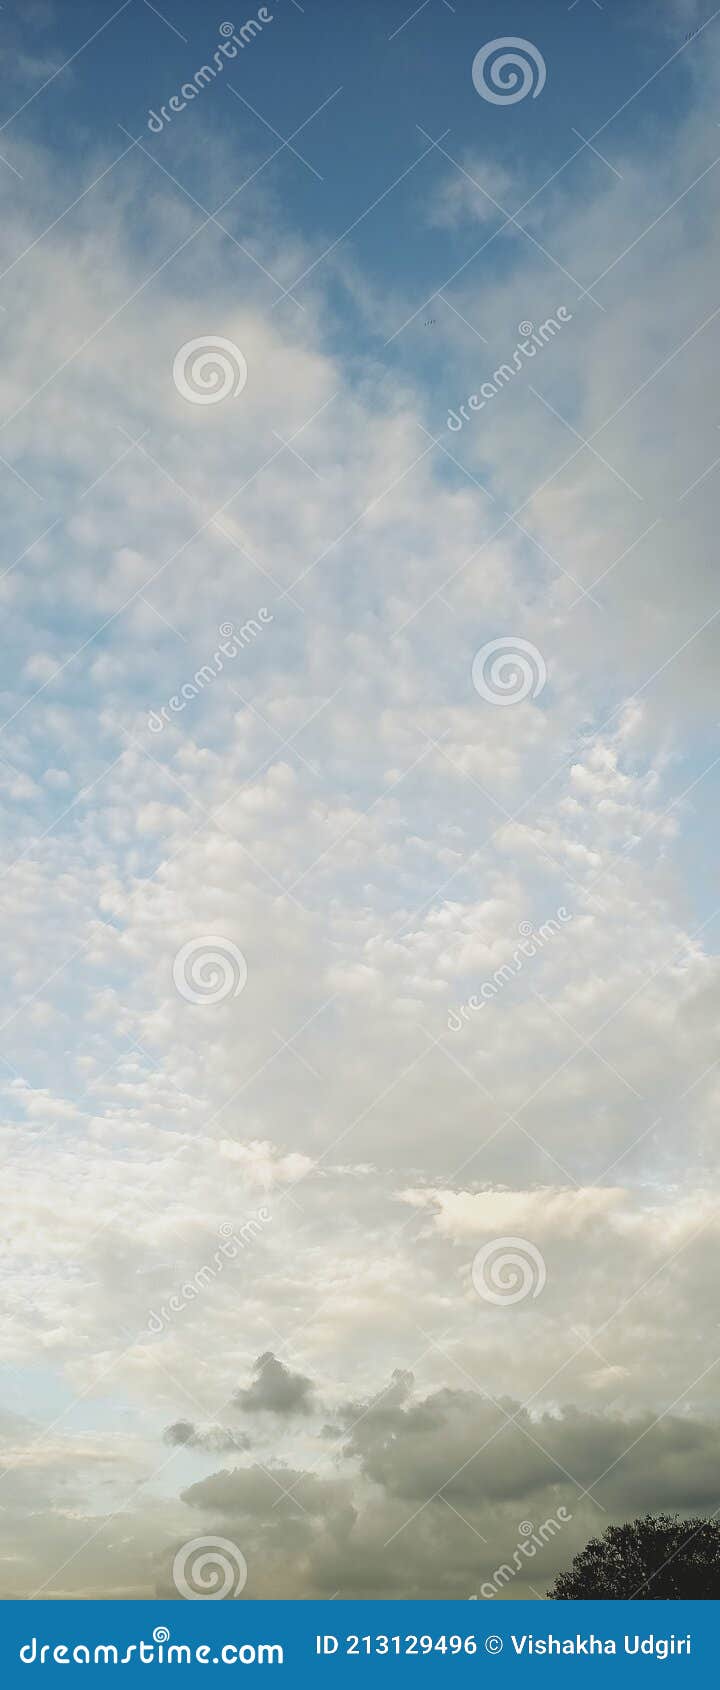 Amazing Sky Wallpaper for Full Screen Mobile Stock Photo - Image of window,  screen: 213129496